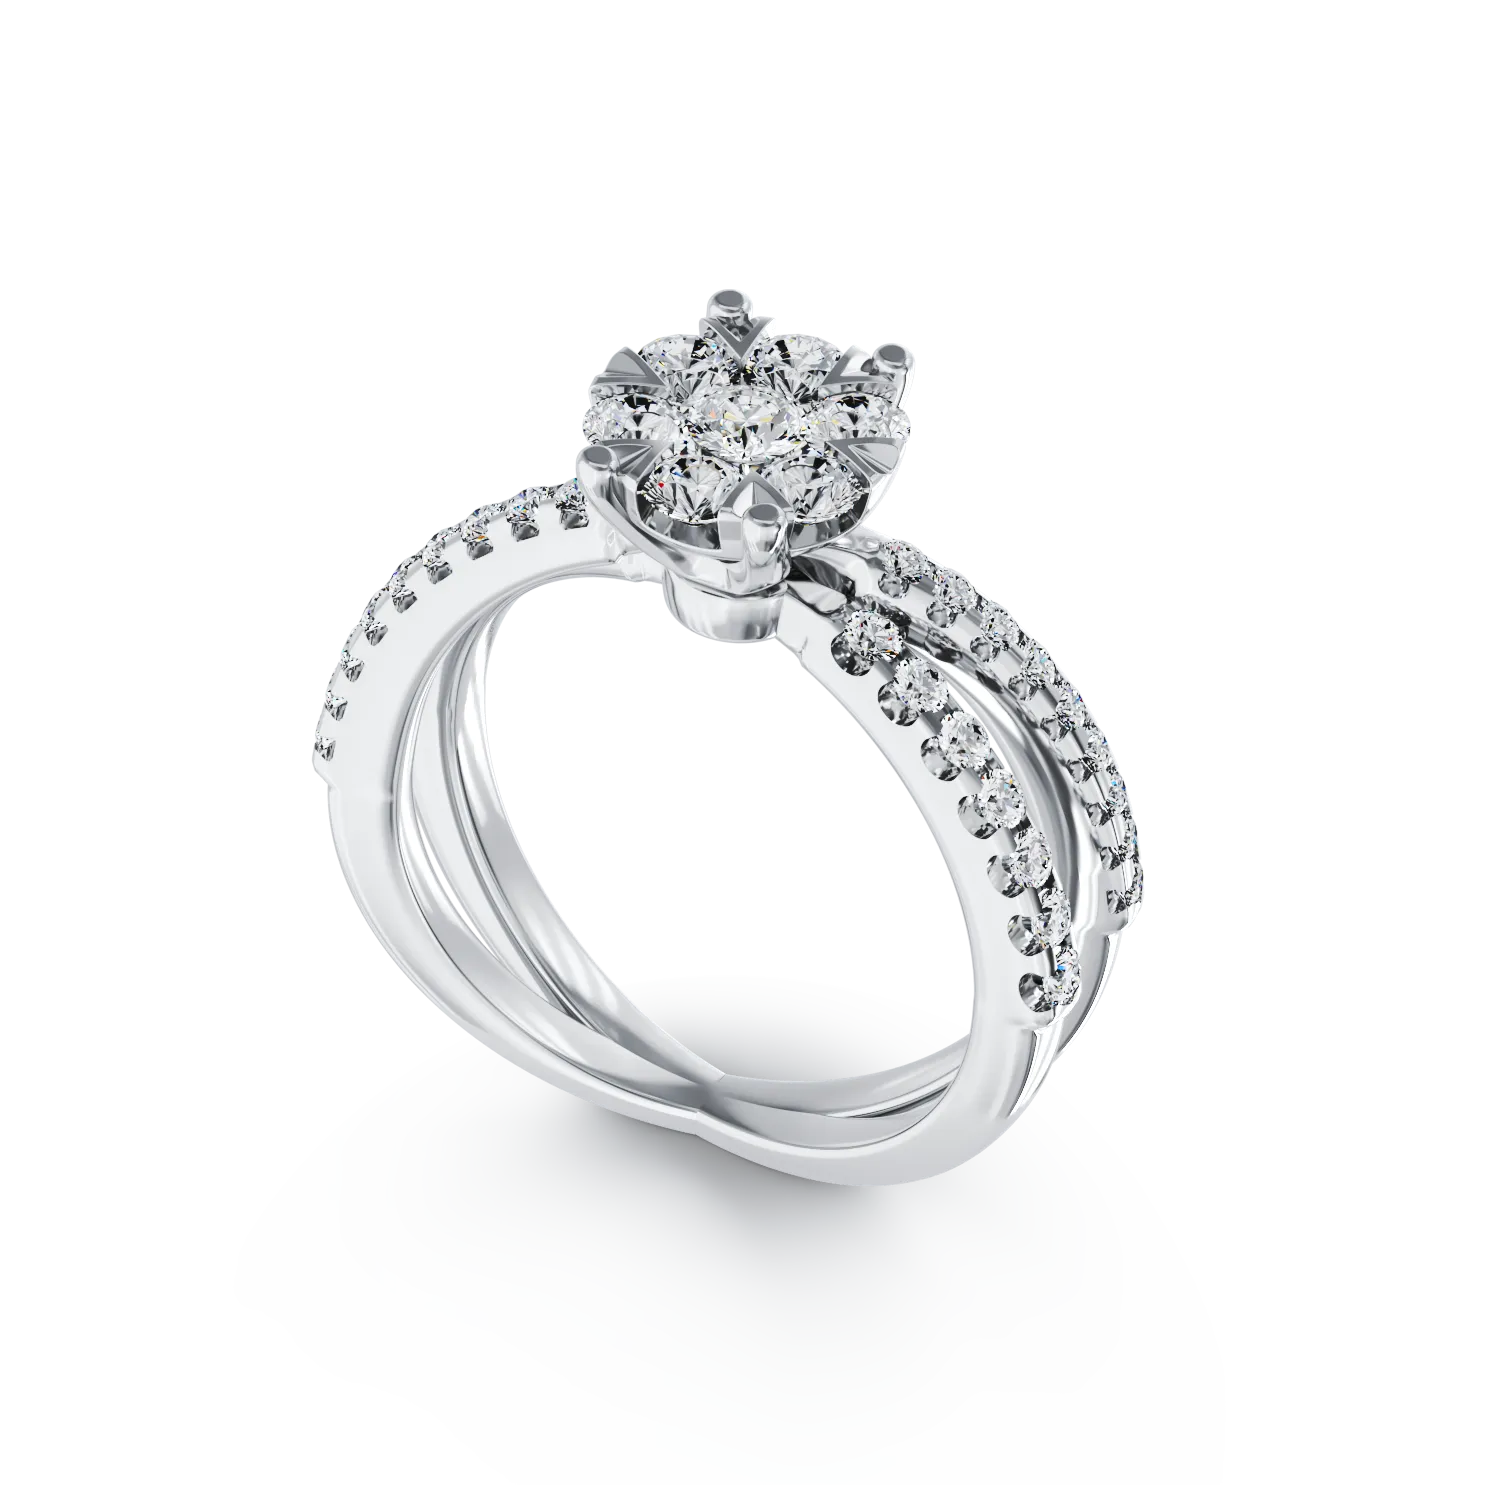 18K white gold engagement ring with diamonds of 0.6ct